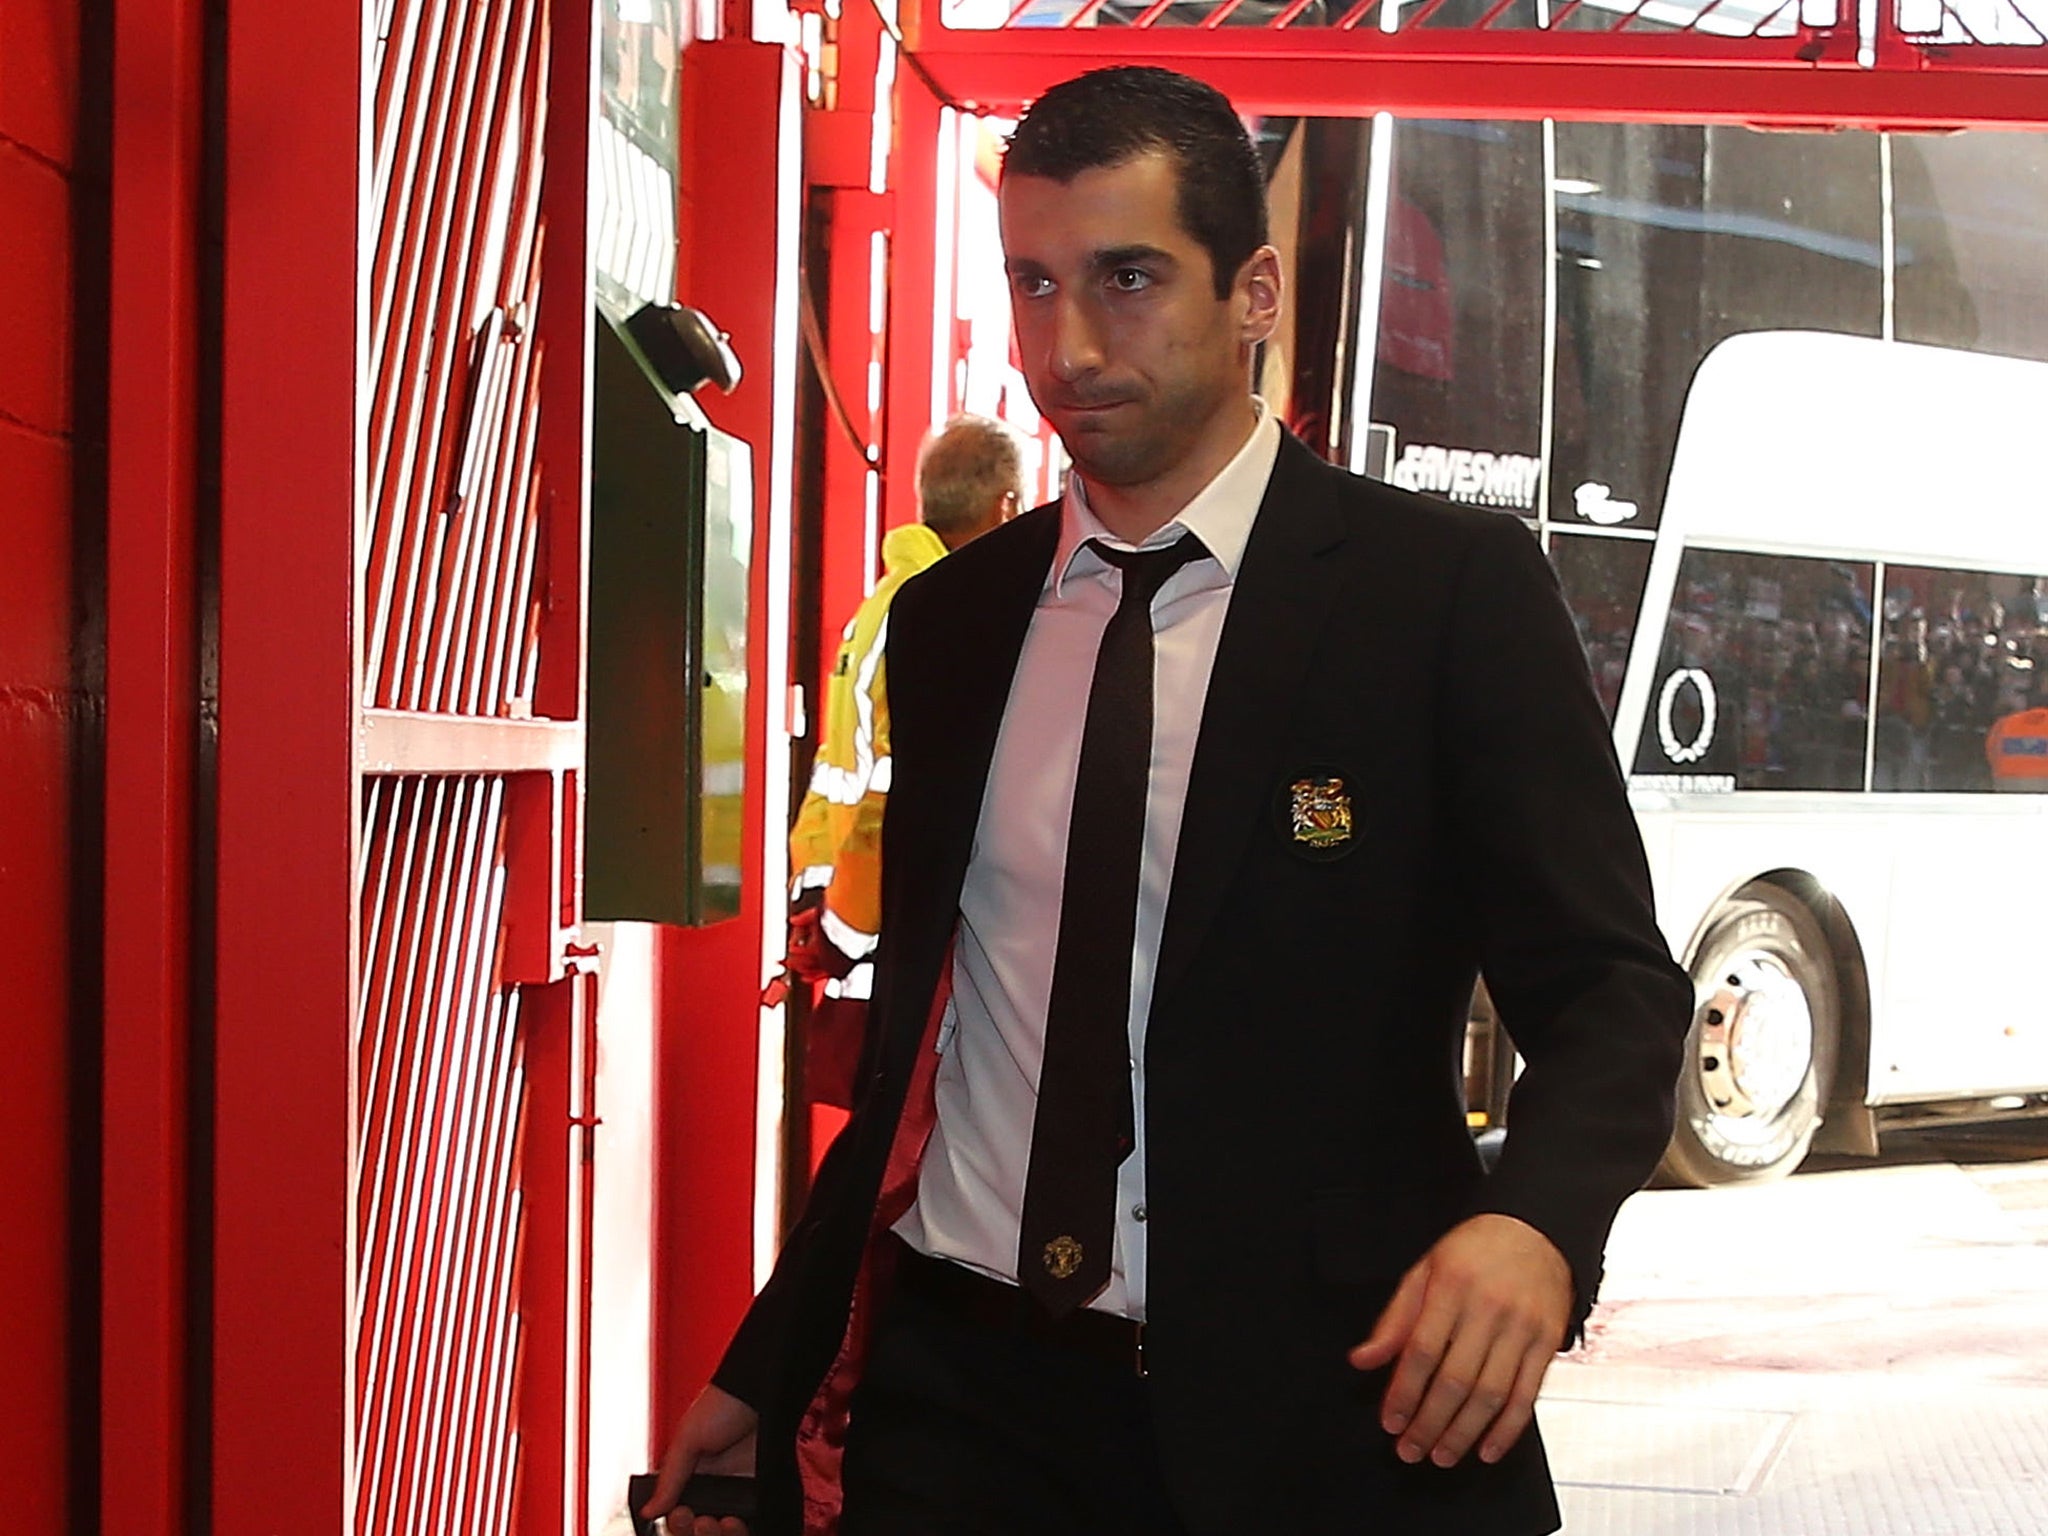 Henrikh Mkhitaryan was substituted during the draw against West Brom